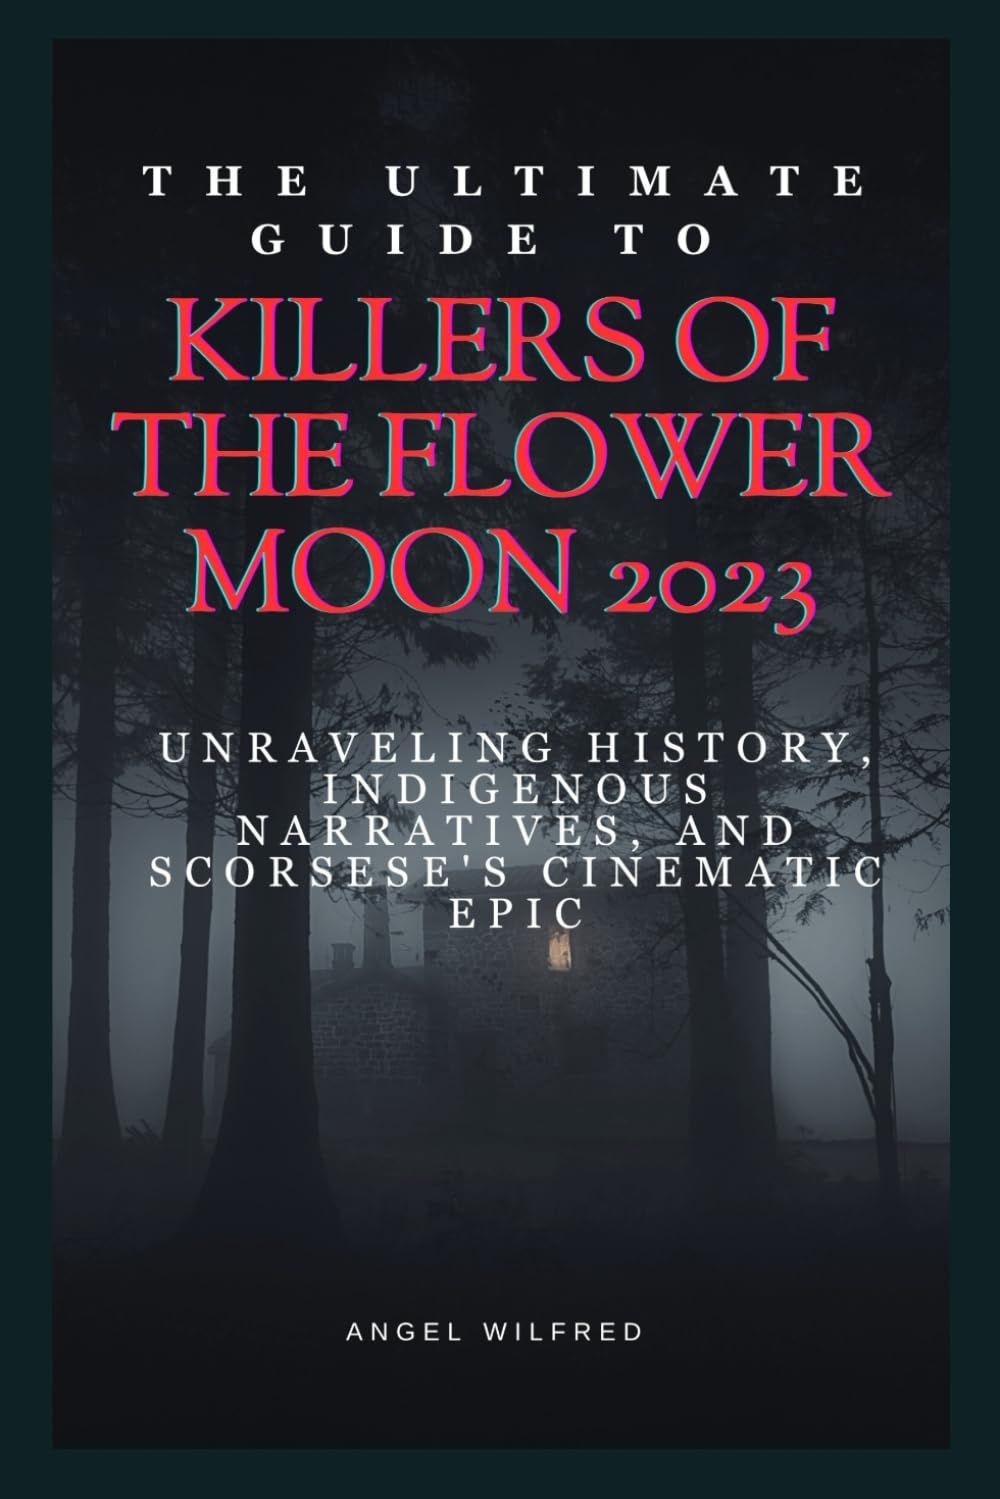 The Ultimate Guide To Killers Of The Flower Moon 2023: Unraveling History, Indigenous Narratives, And Scorsese's Cinematic Epic (The Essential Movie Guide)